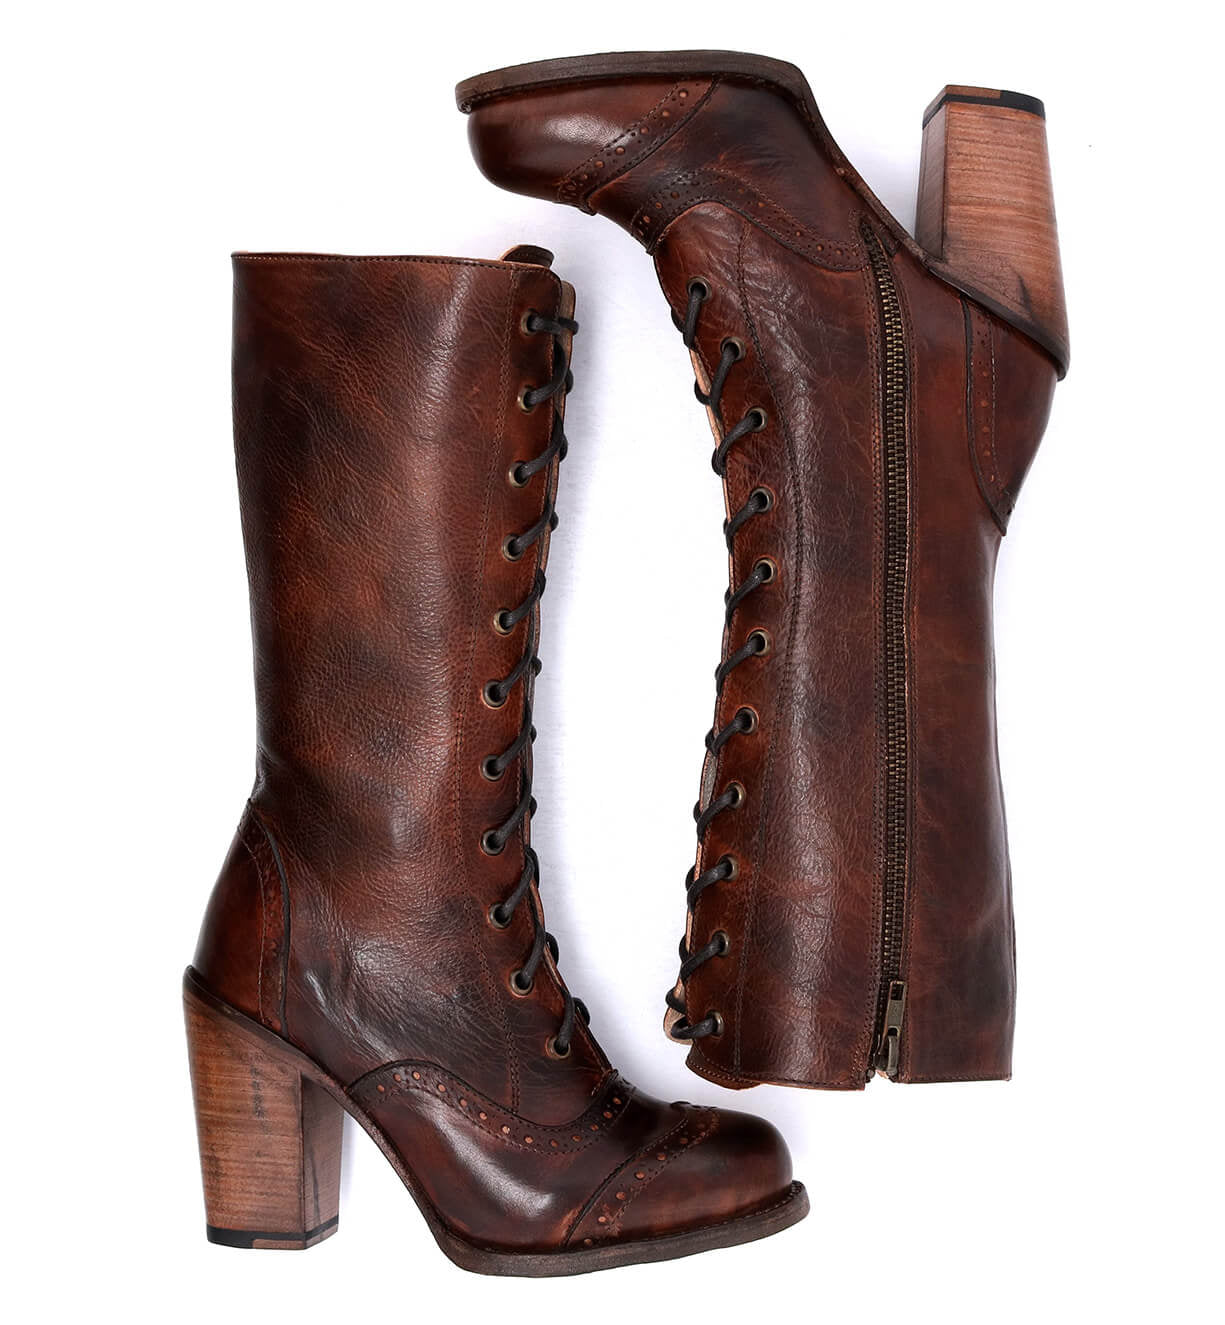 A pair of Oak Tree Farms Ariana women's brown leather boots with wooden heels.